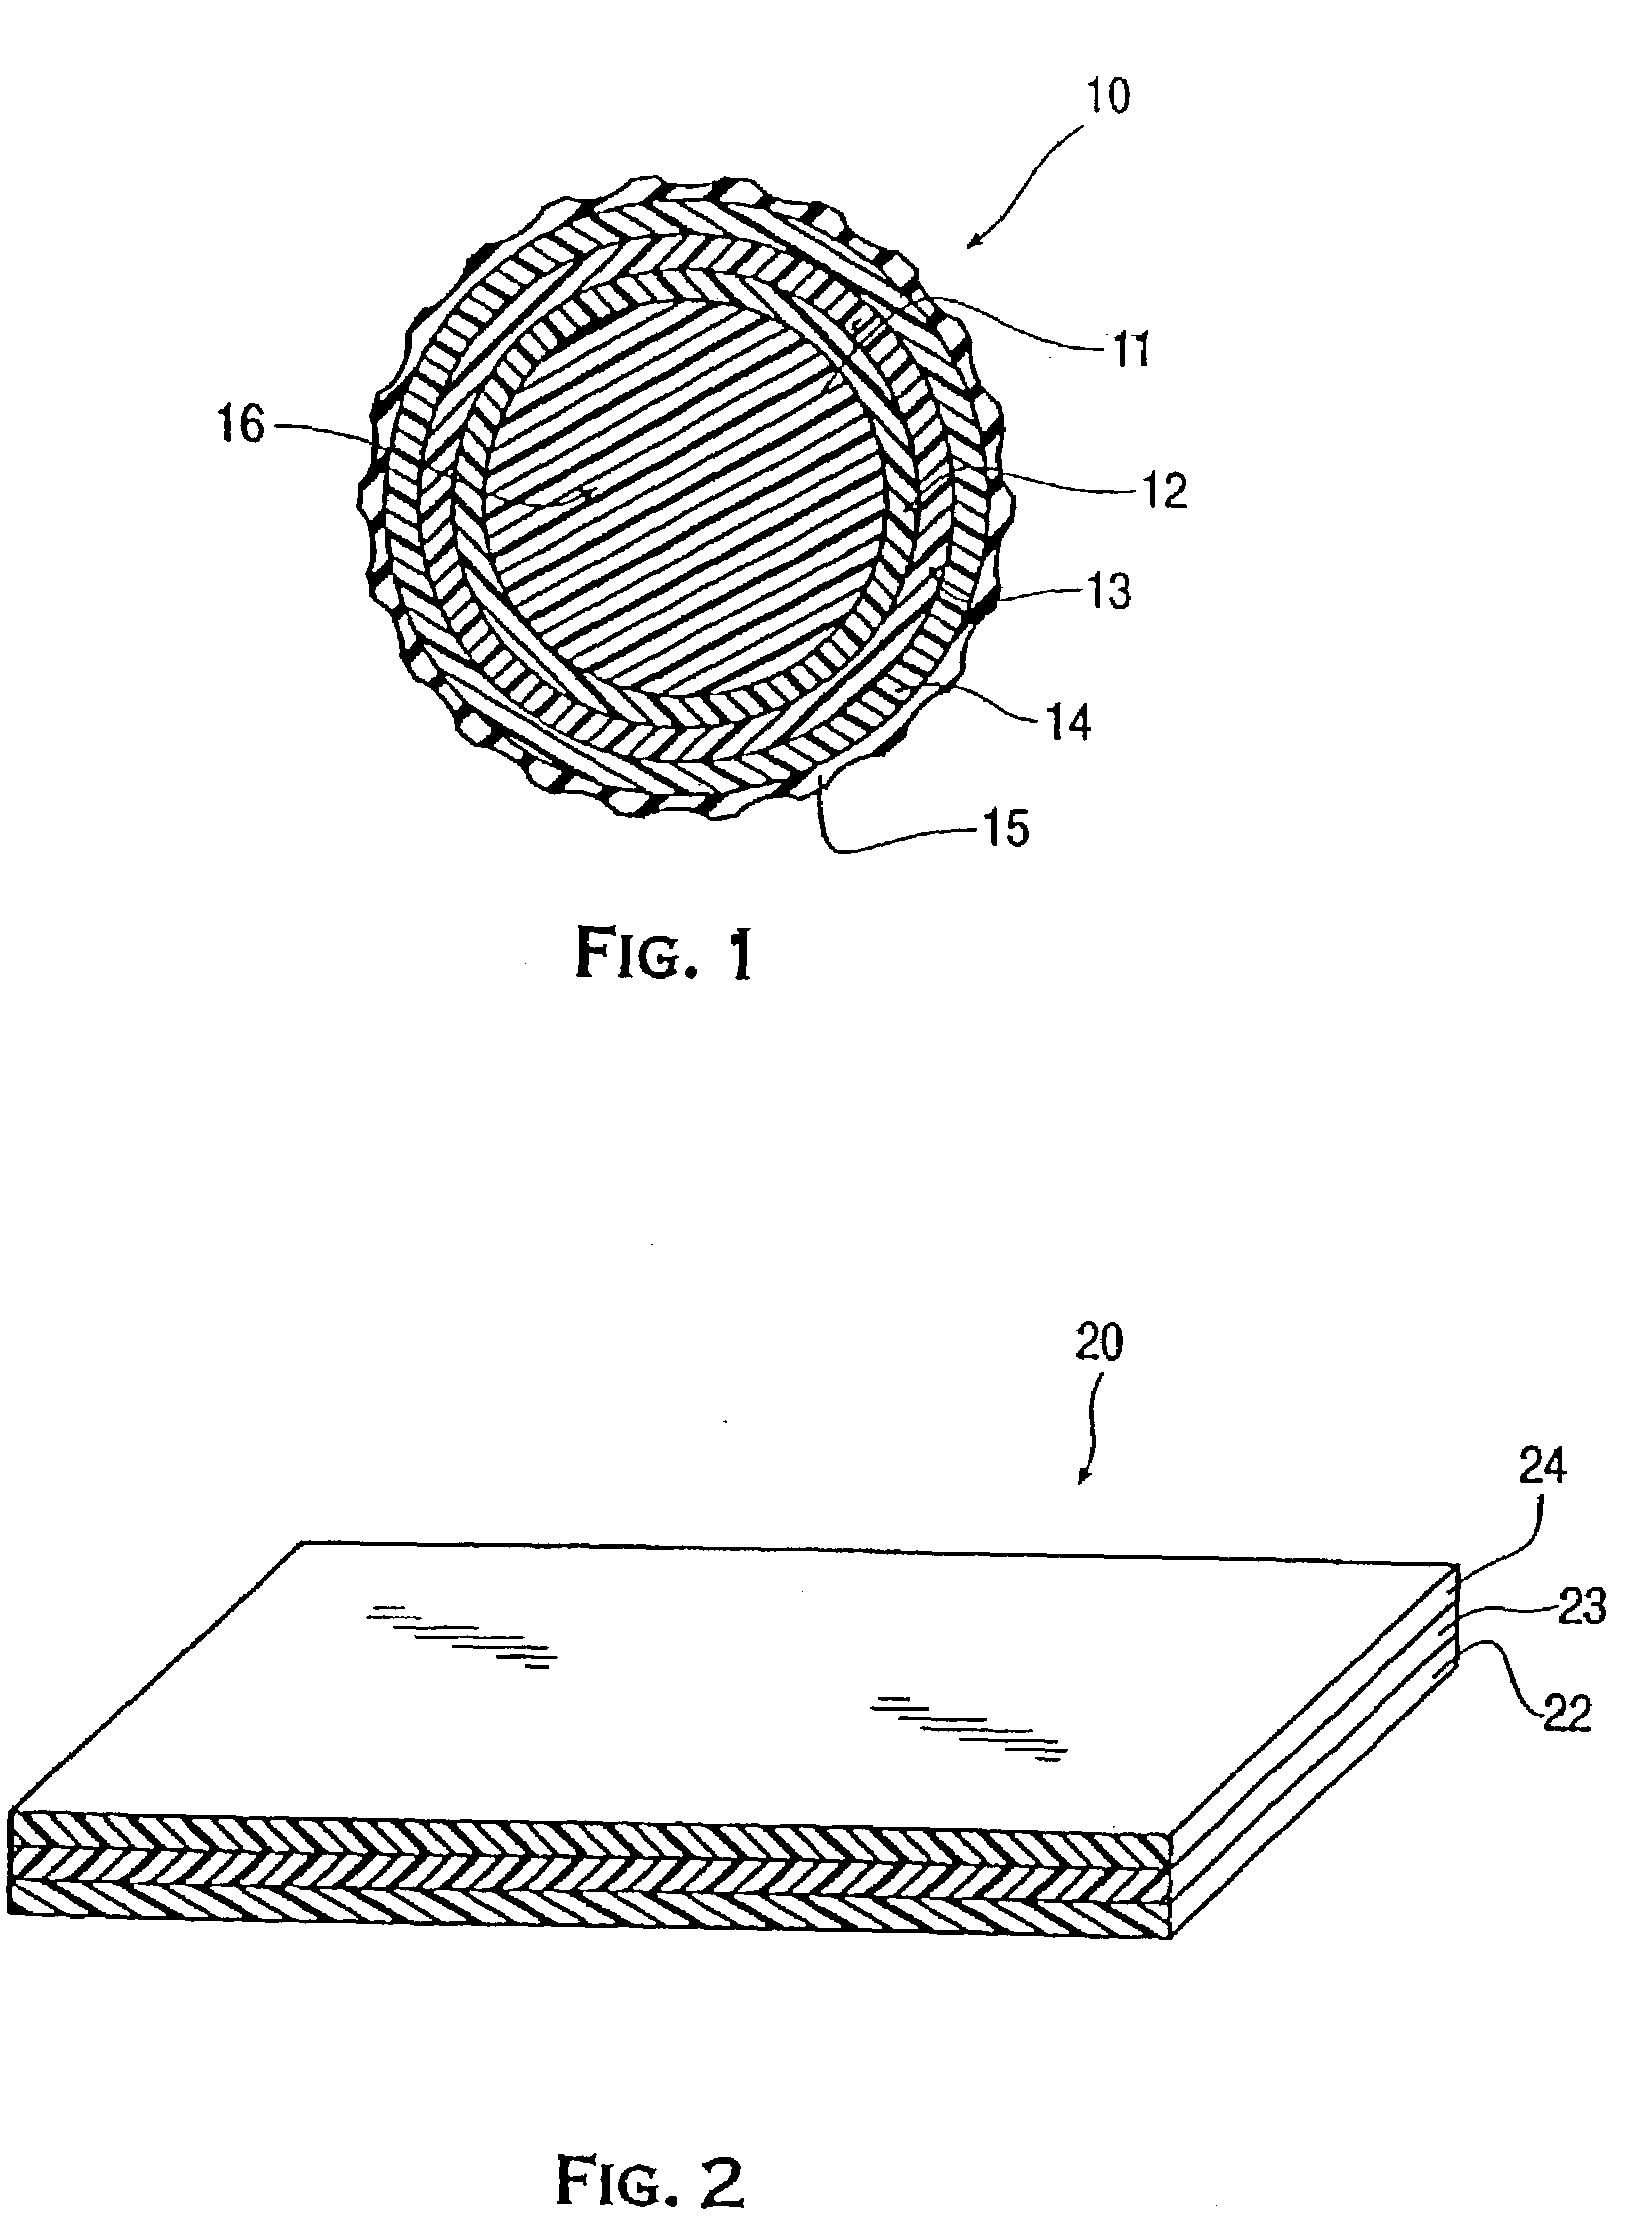 Method of making a golf ball with a multi-layer core